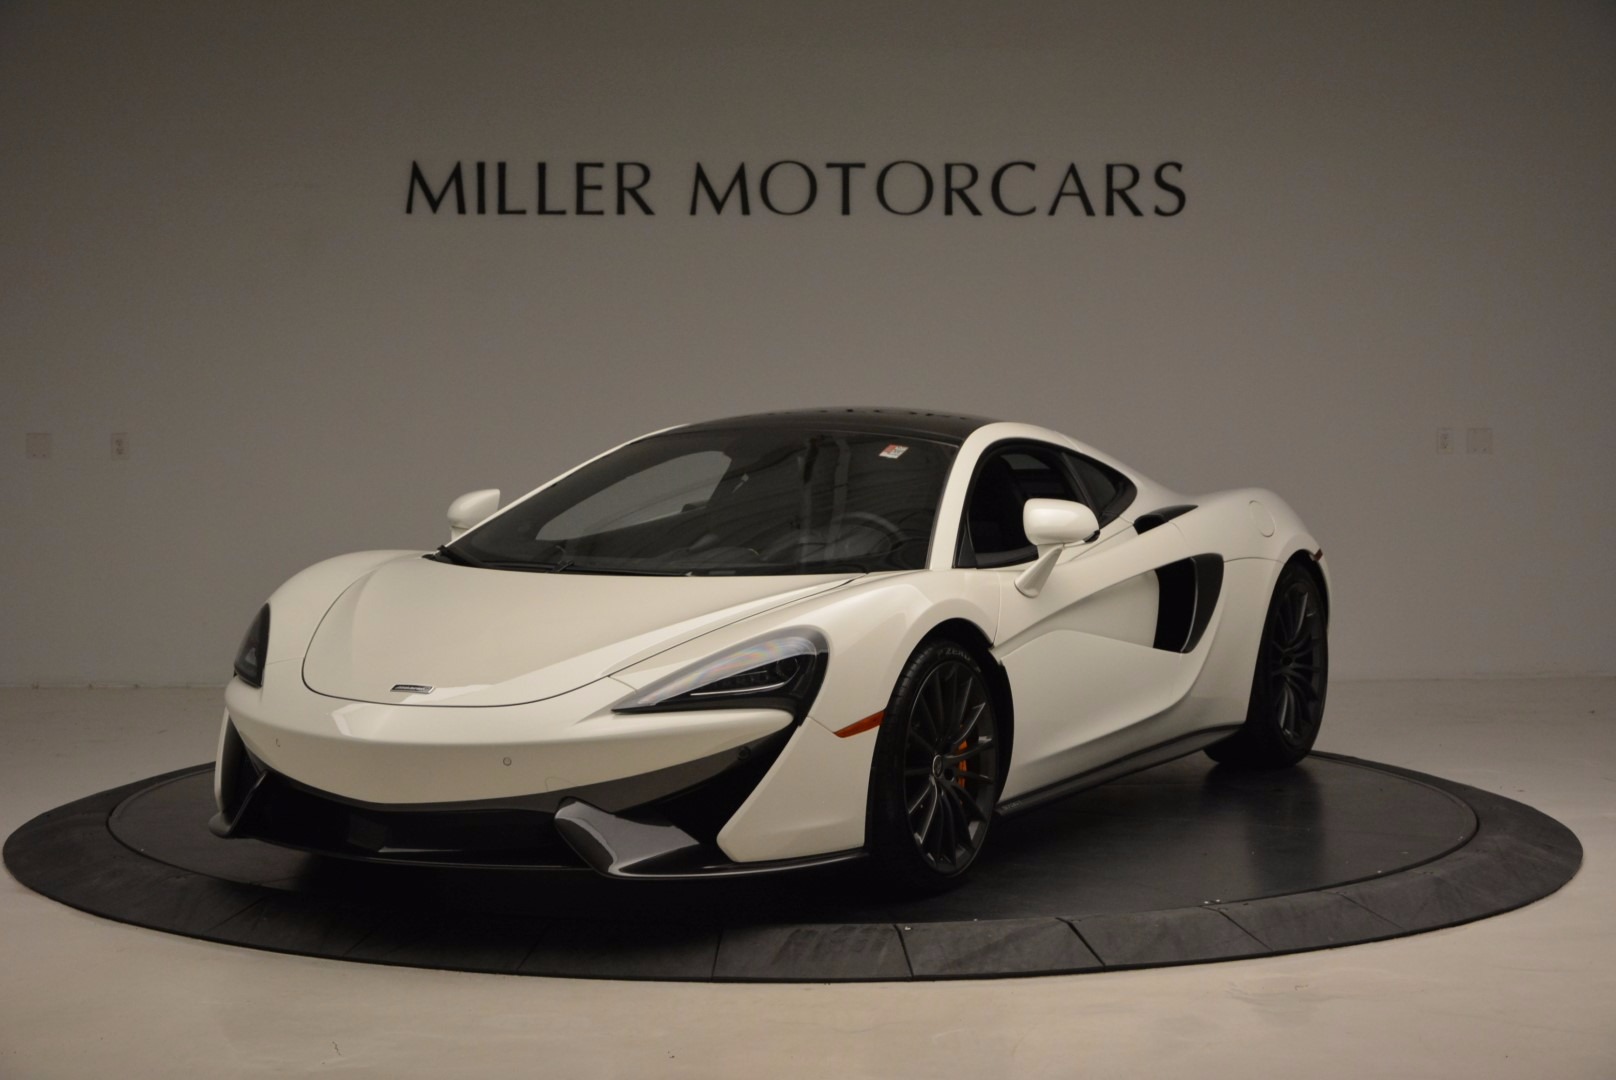 Used 2017 McLaren 570GT for sale Sold at Alfa Romeo of Greenwich in Greenwich CT 06830 1